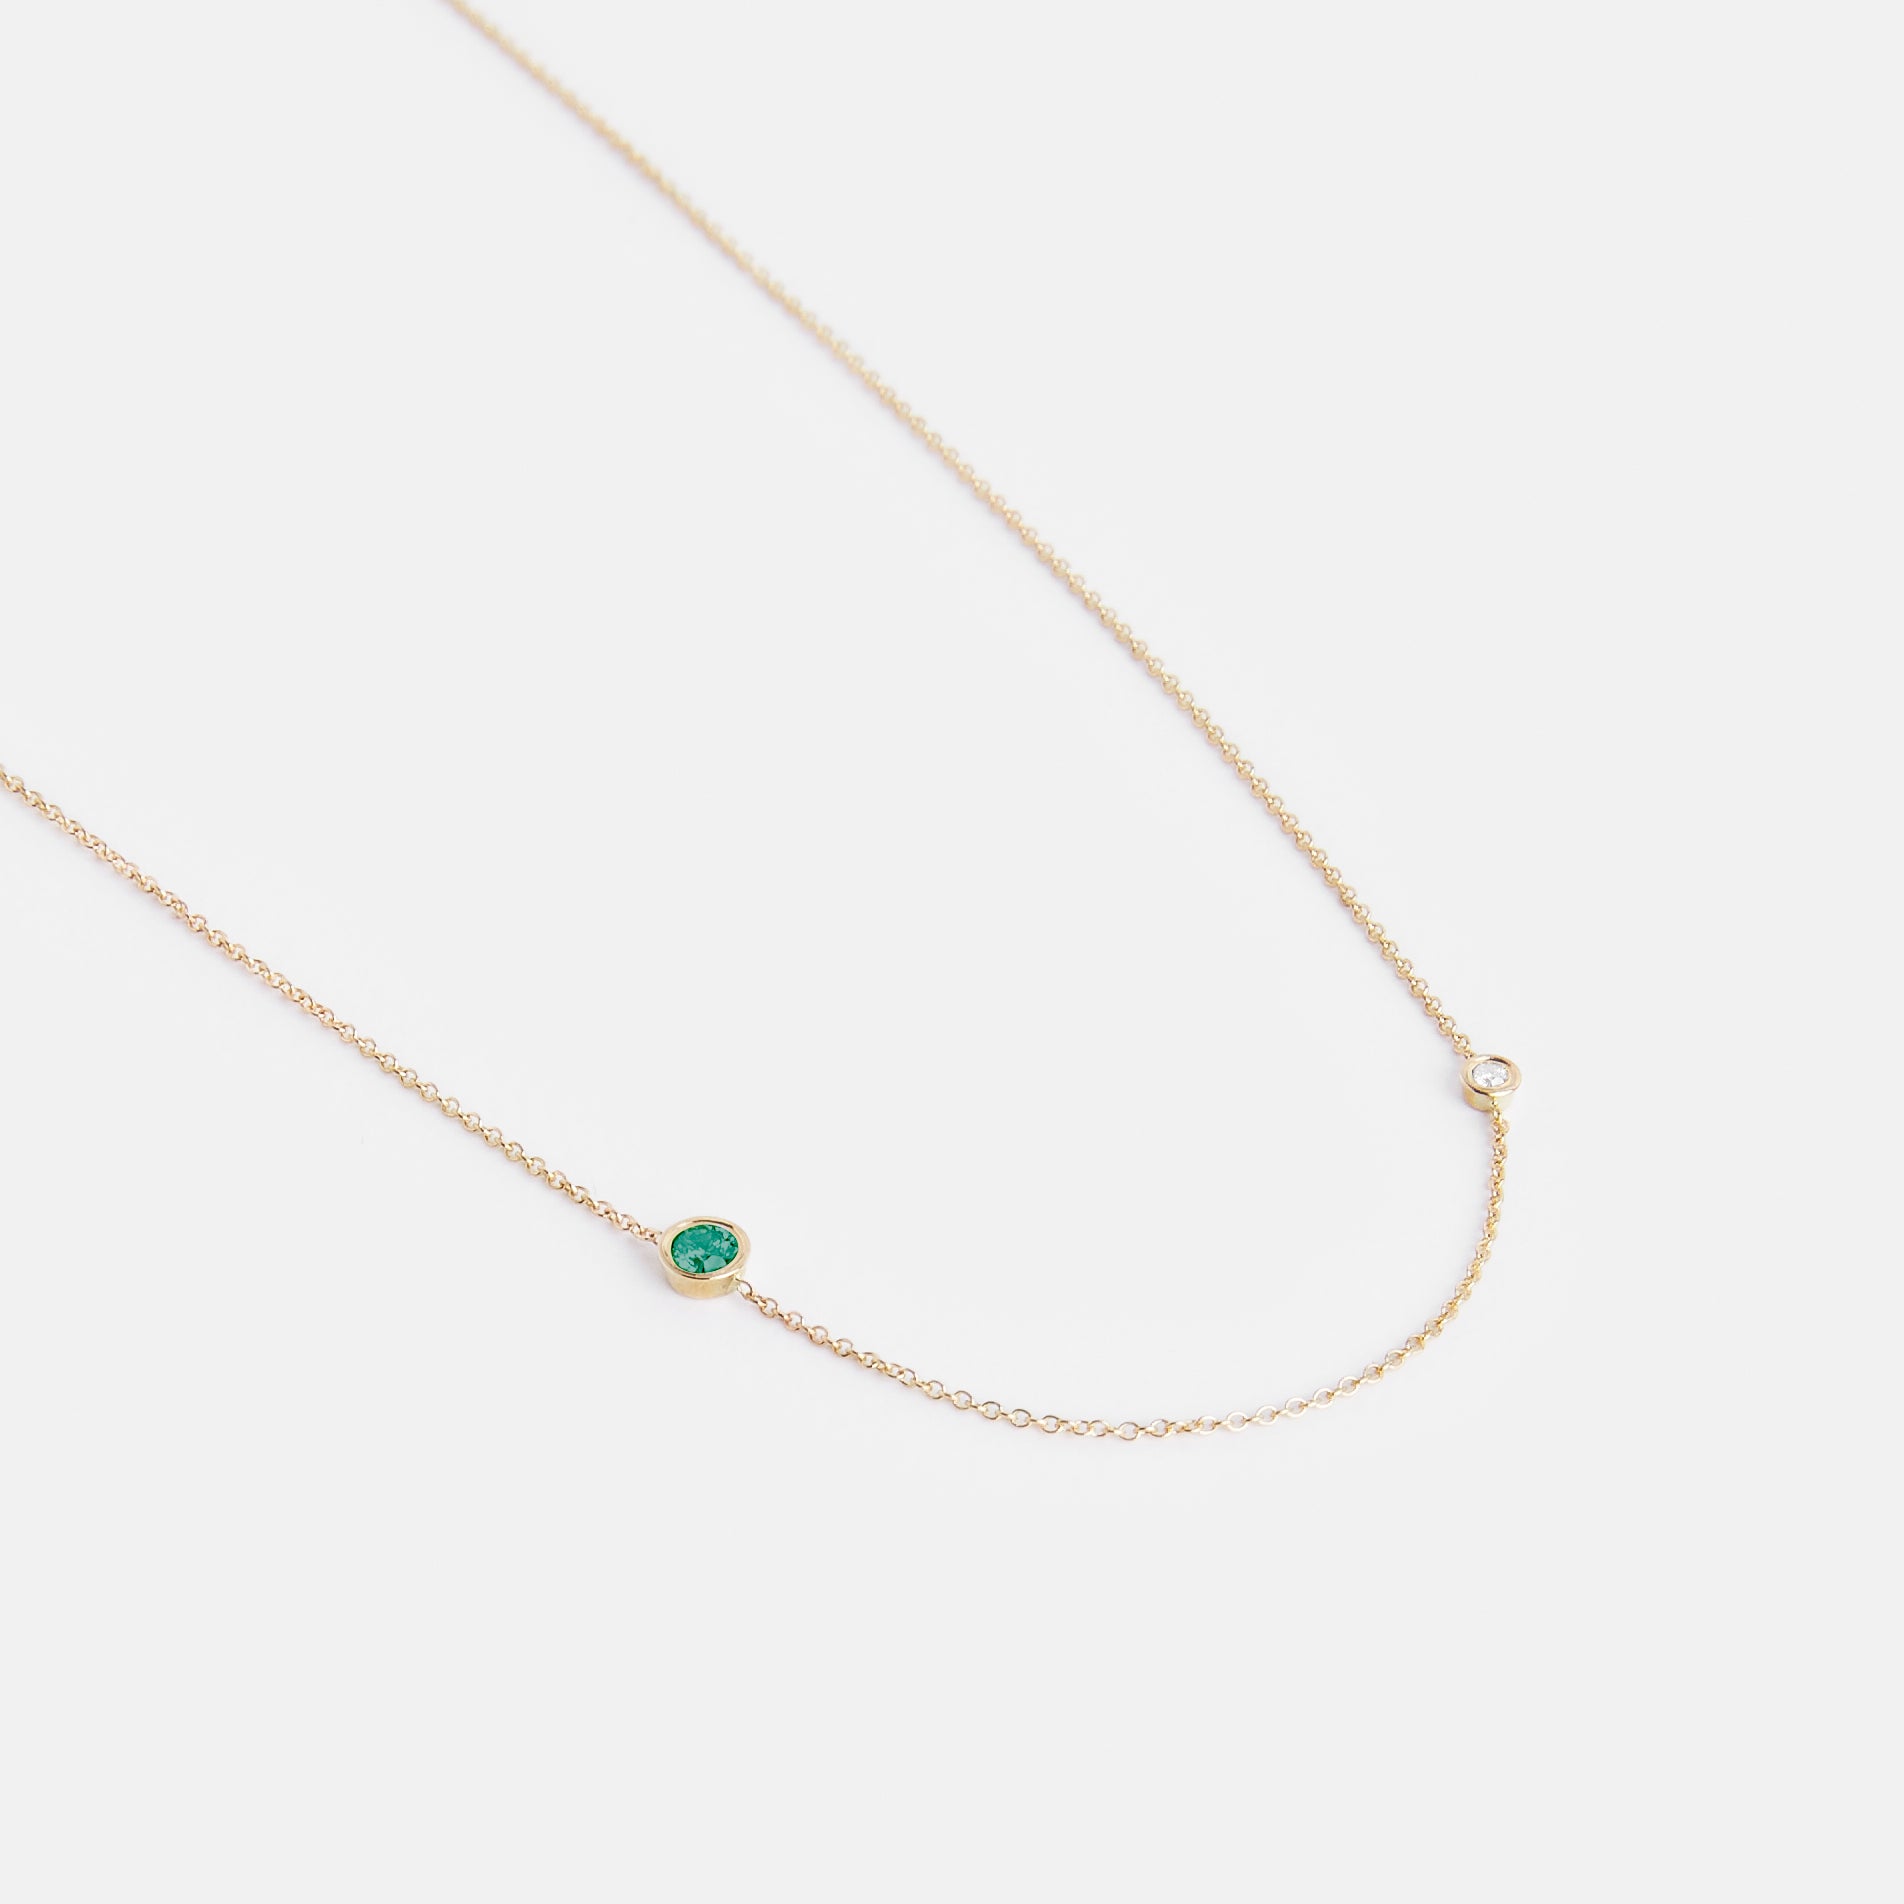 Iba Simple Necklace in 14k Gold set with White Diamond and Emerald By SHW Fine Jewelry NYC